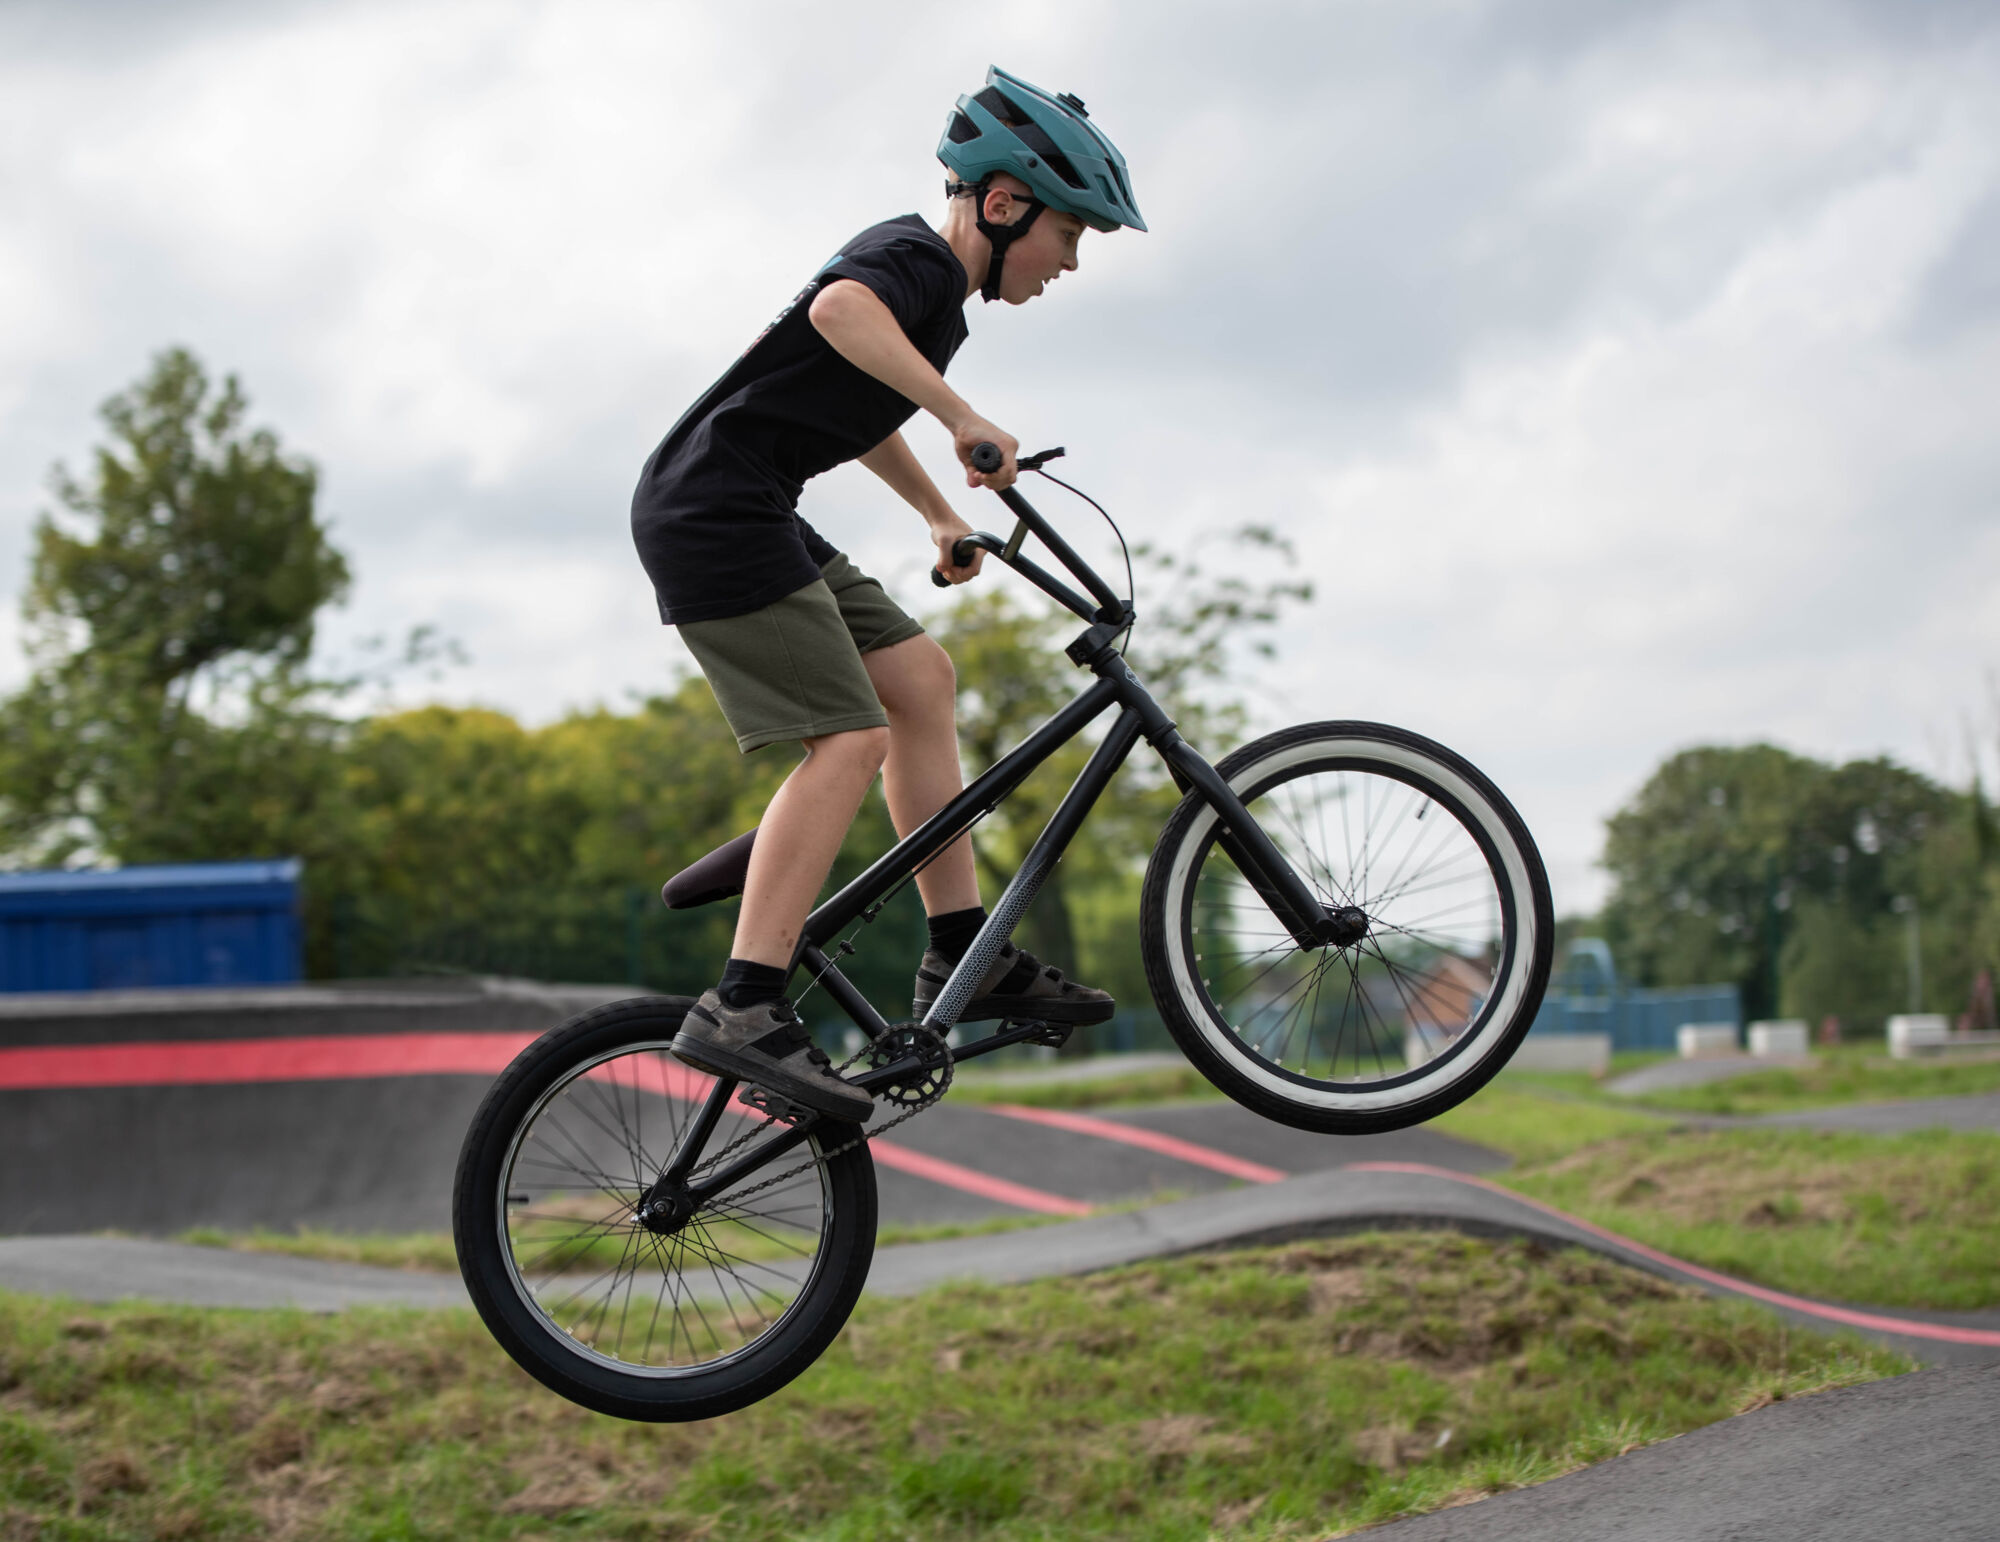 Child doing a jump on a BMX bike in a pump track park